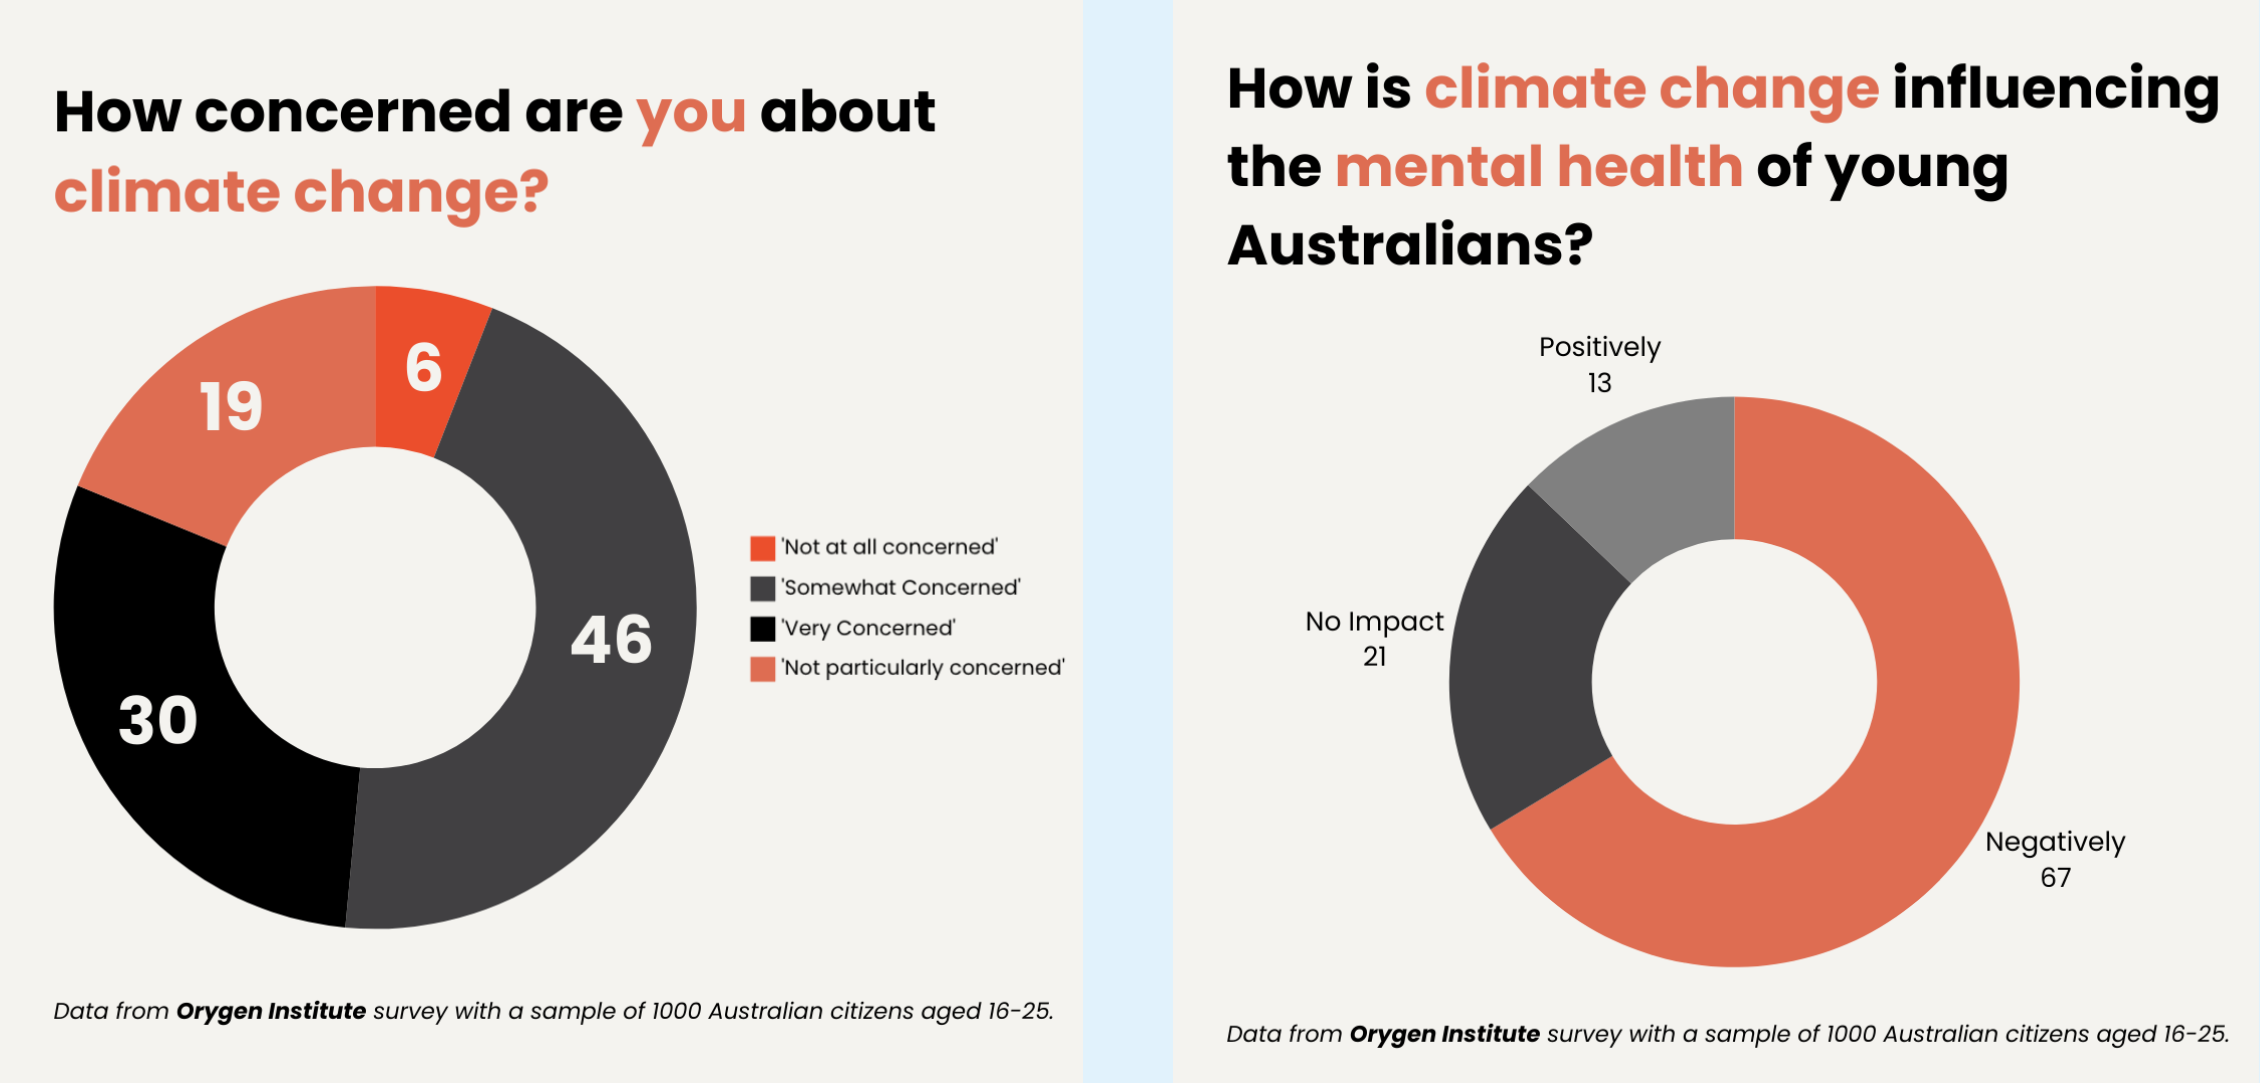 How climate change is influencing the mental health of young Australians